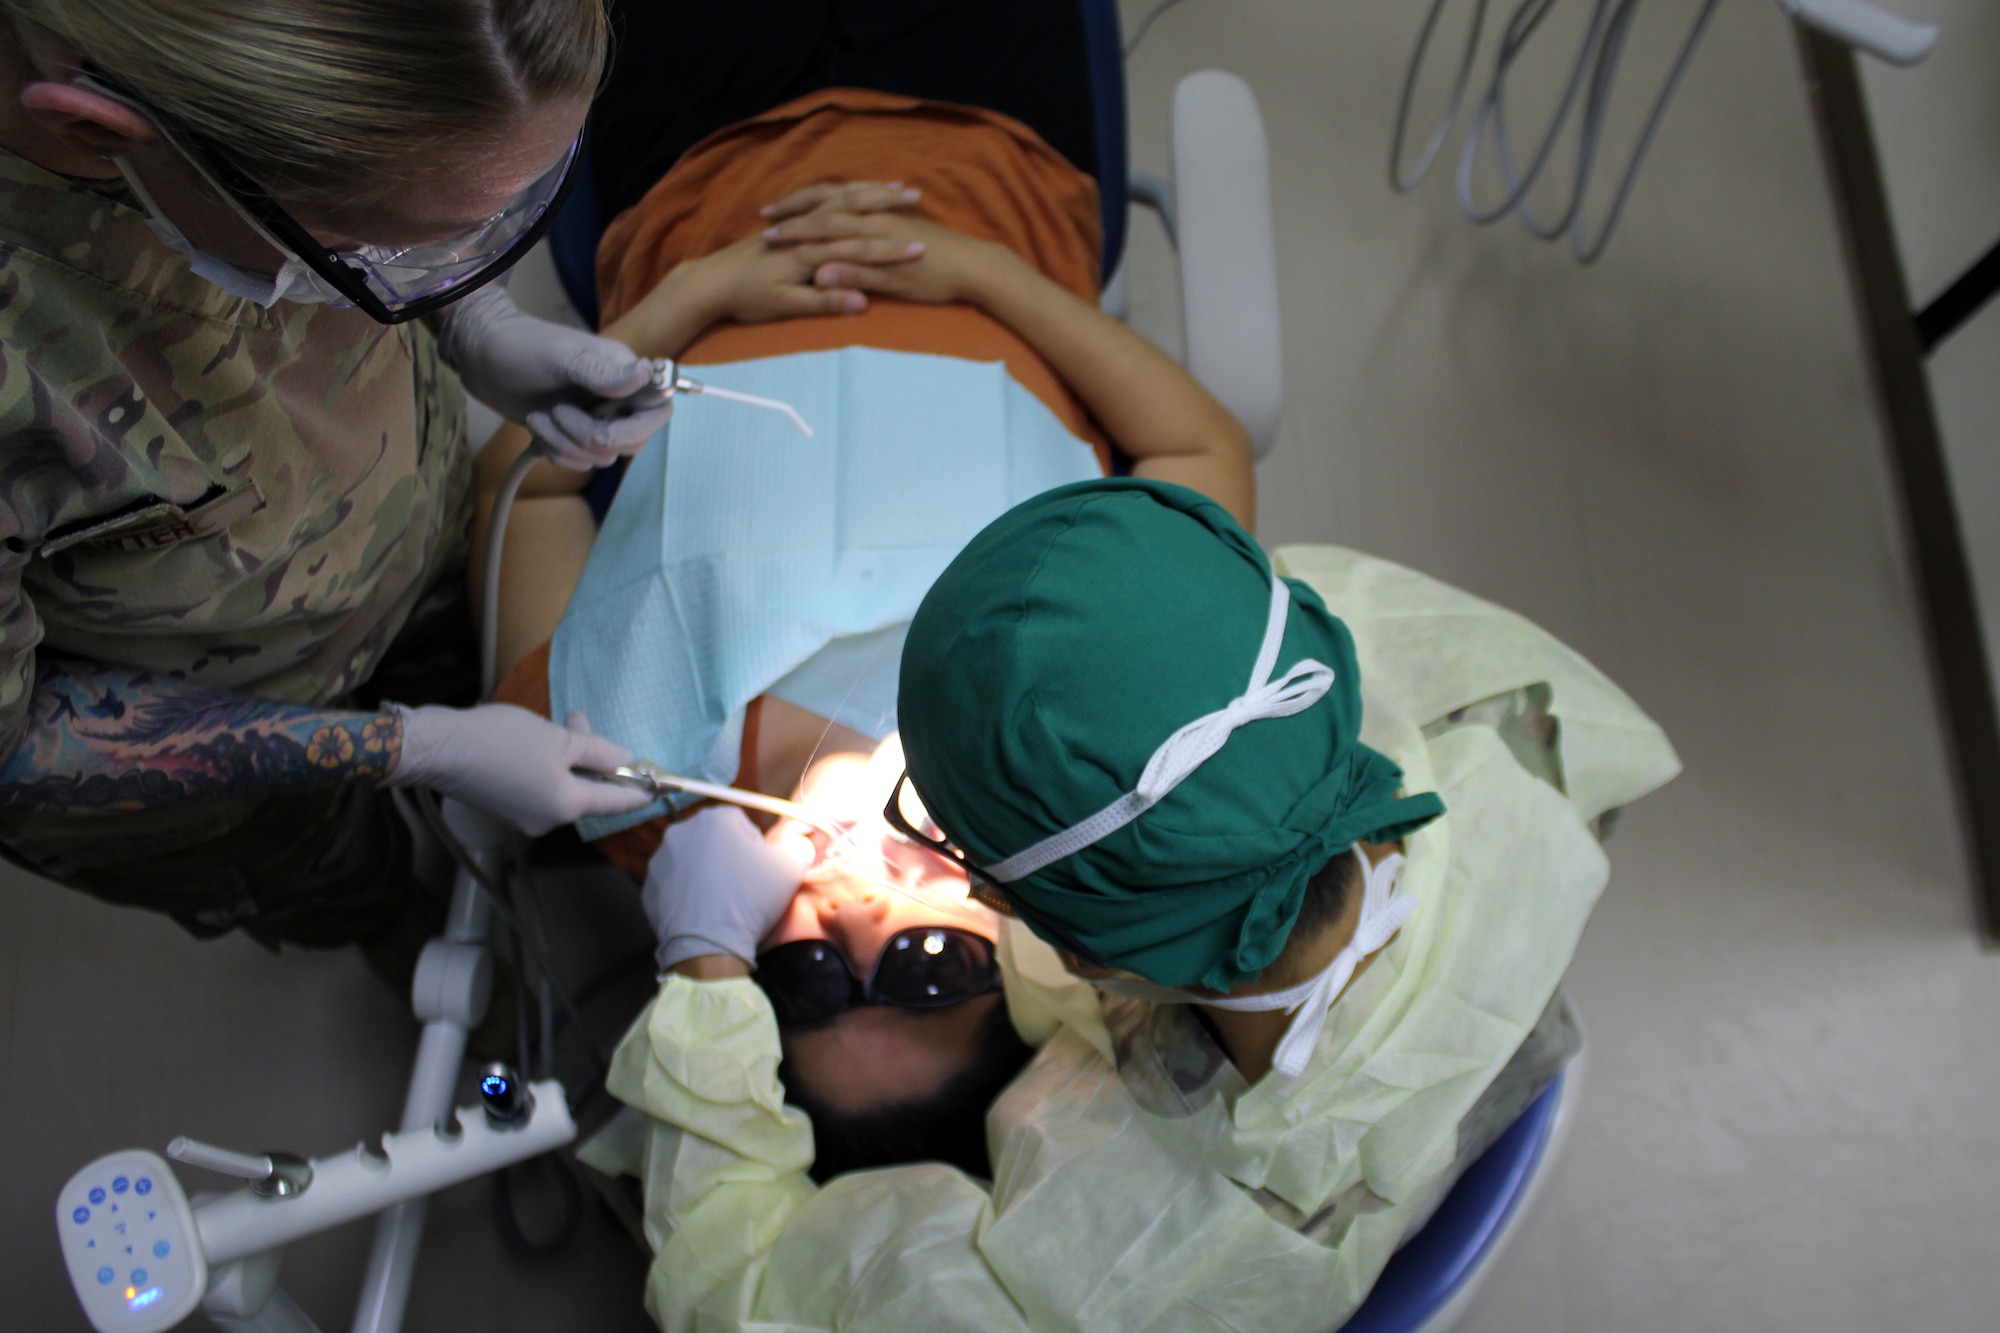 Tech. Sgt. Tiffani Lawter, a dental technician with the 380th Medical Group, prepares instruments for a dental procedure at the medical clinic at Al Dhafra Air Base, United Arab Emirates, Nov. 30, 2021. The dental office at the clinic provides emergency dental services to support the 380th Air Expeditionary Wing and other U.S. operations at the base. Lawter is forward deployed from the 131st Bomb Wing, Missouri Air National Guard.